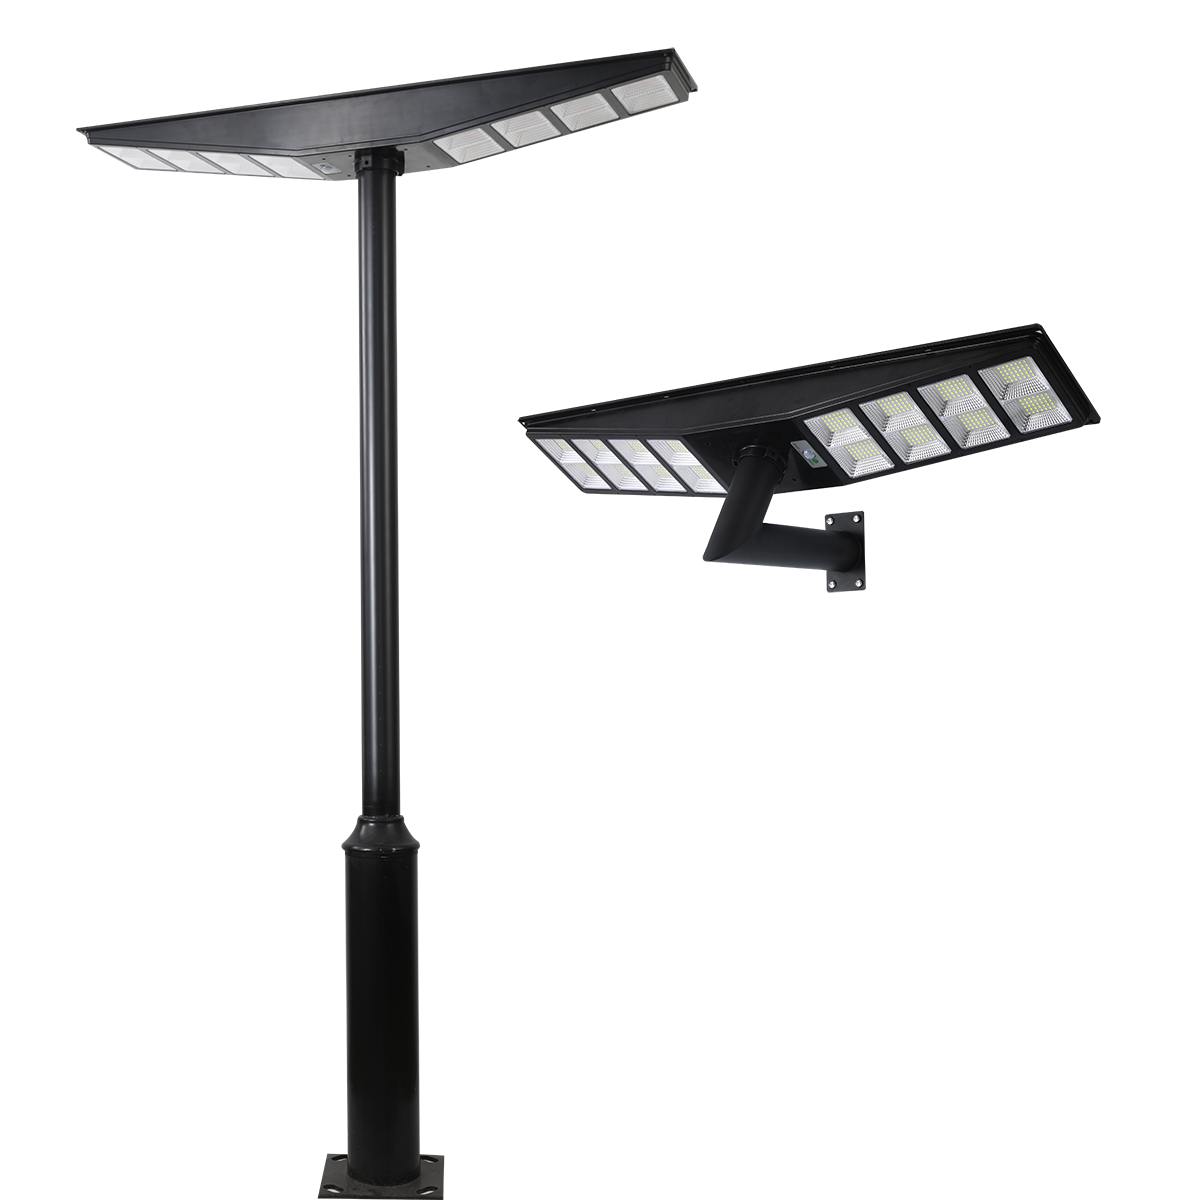 Professional Manufacturer 800W Outdoor Waterproof Solar Lamp All in One IP65 Solar Street Light for